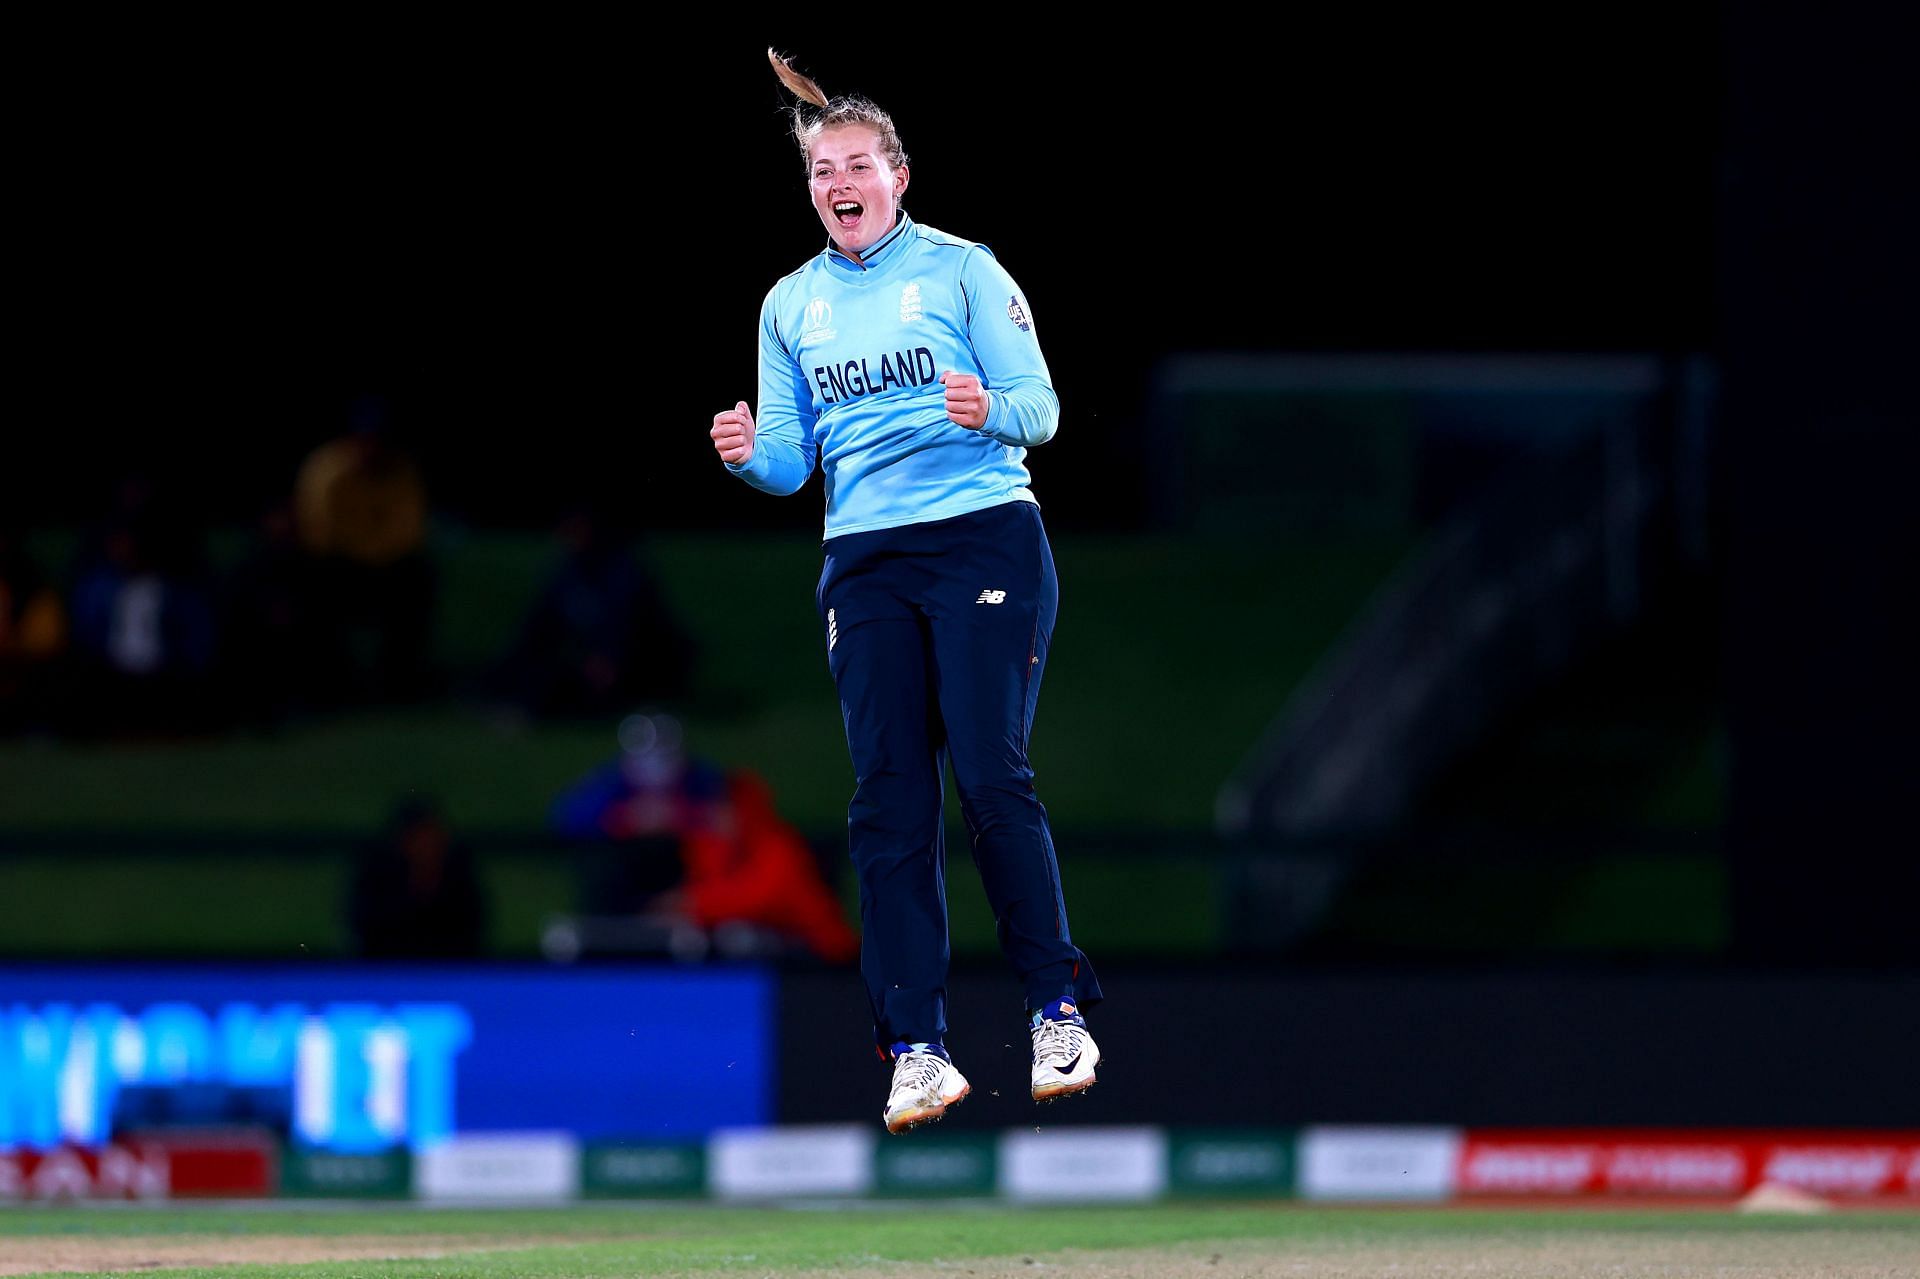 England Women will lock horns with South Africa Women in a three-match ODI series.